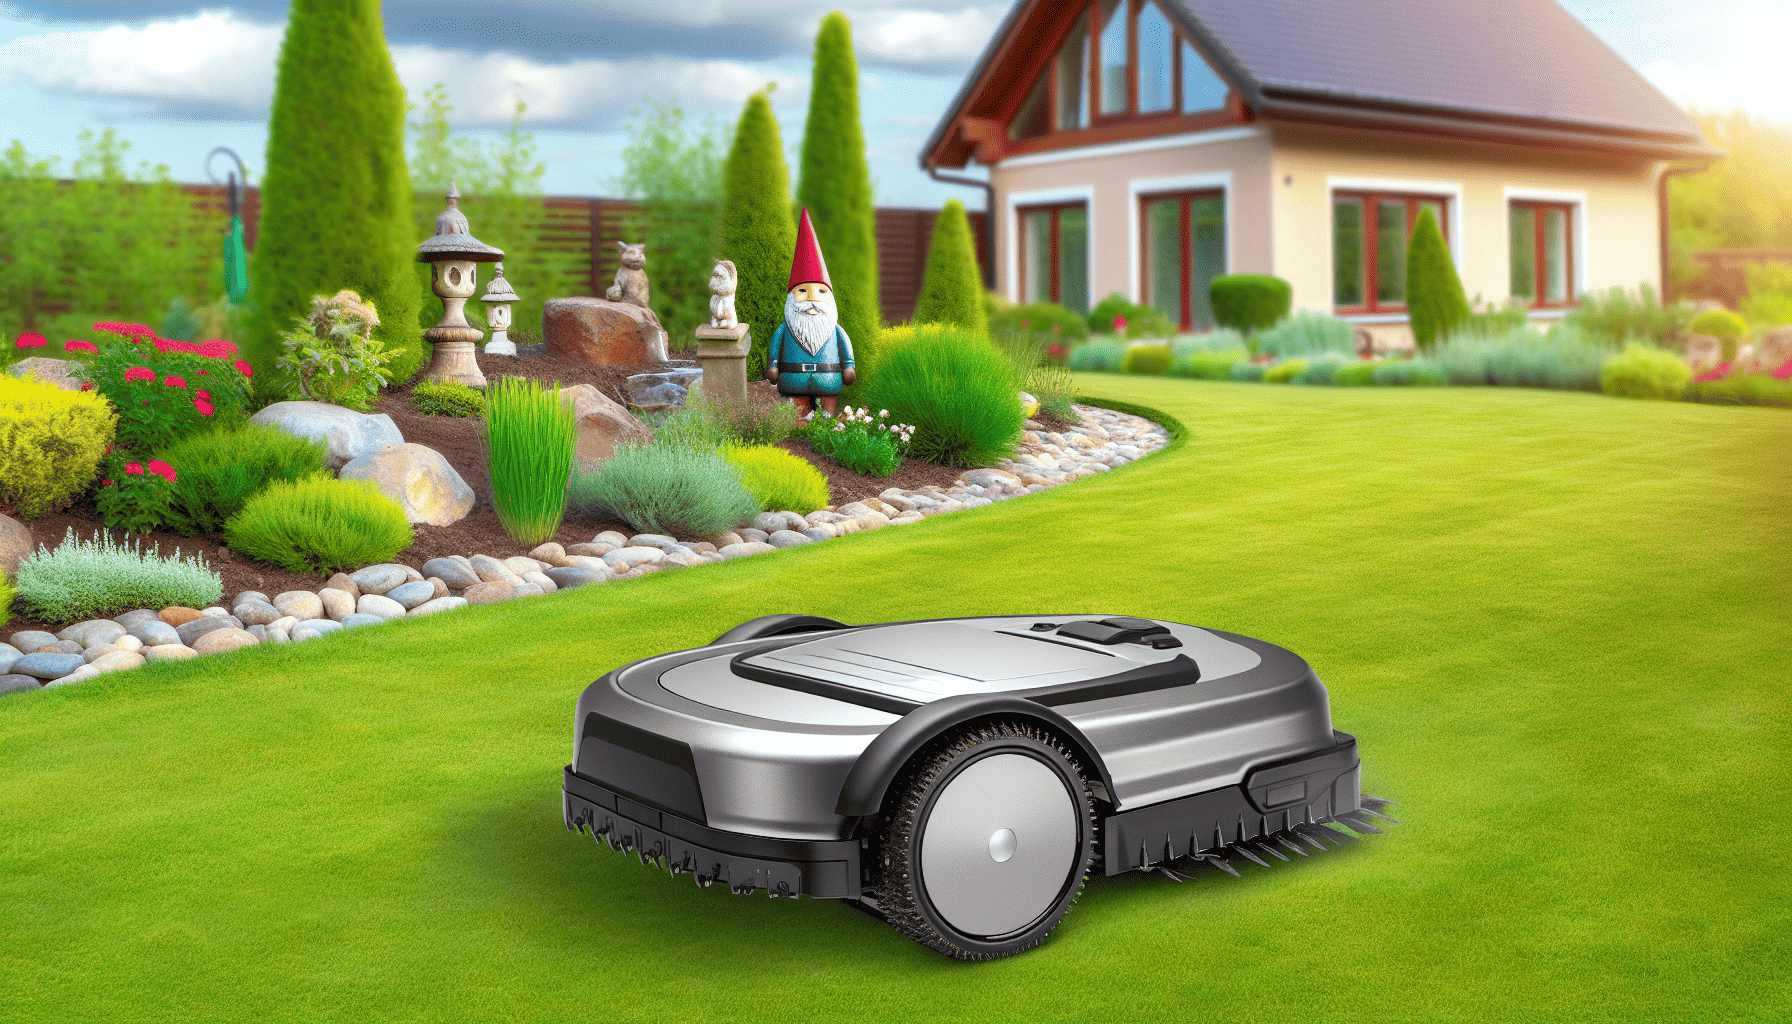 Robotic Lawn Mowers for Effortless Lawn Maintenance